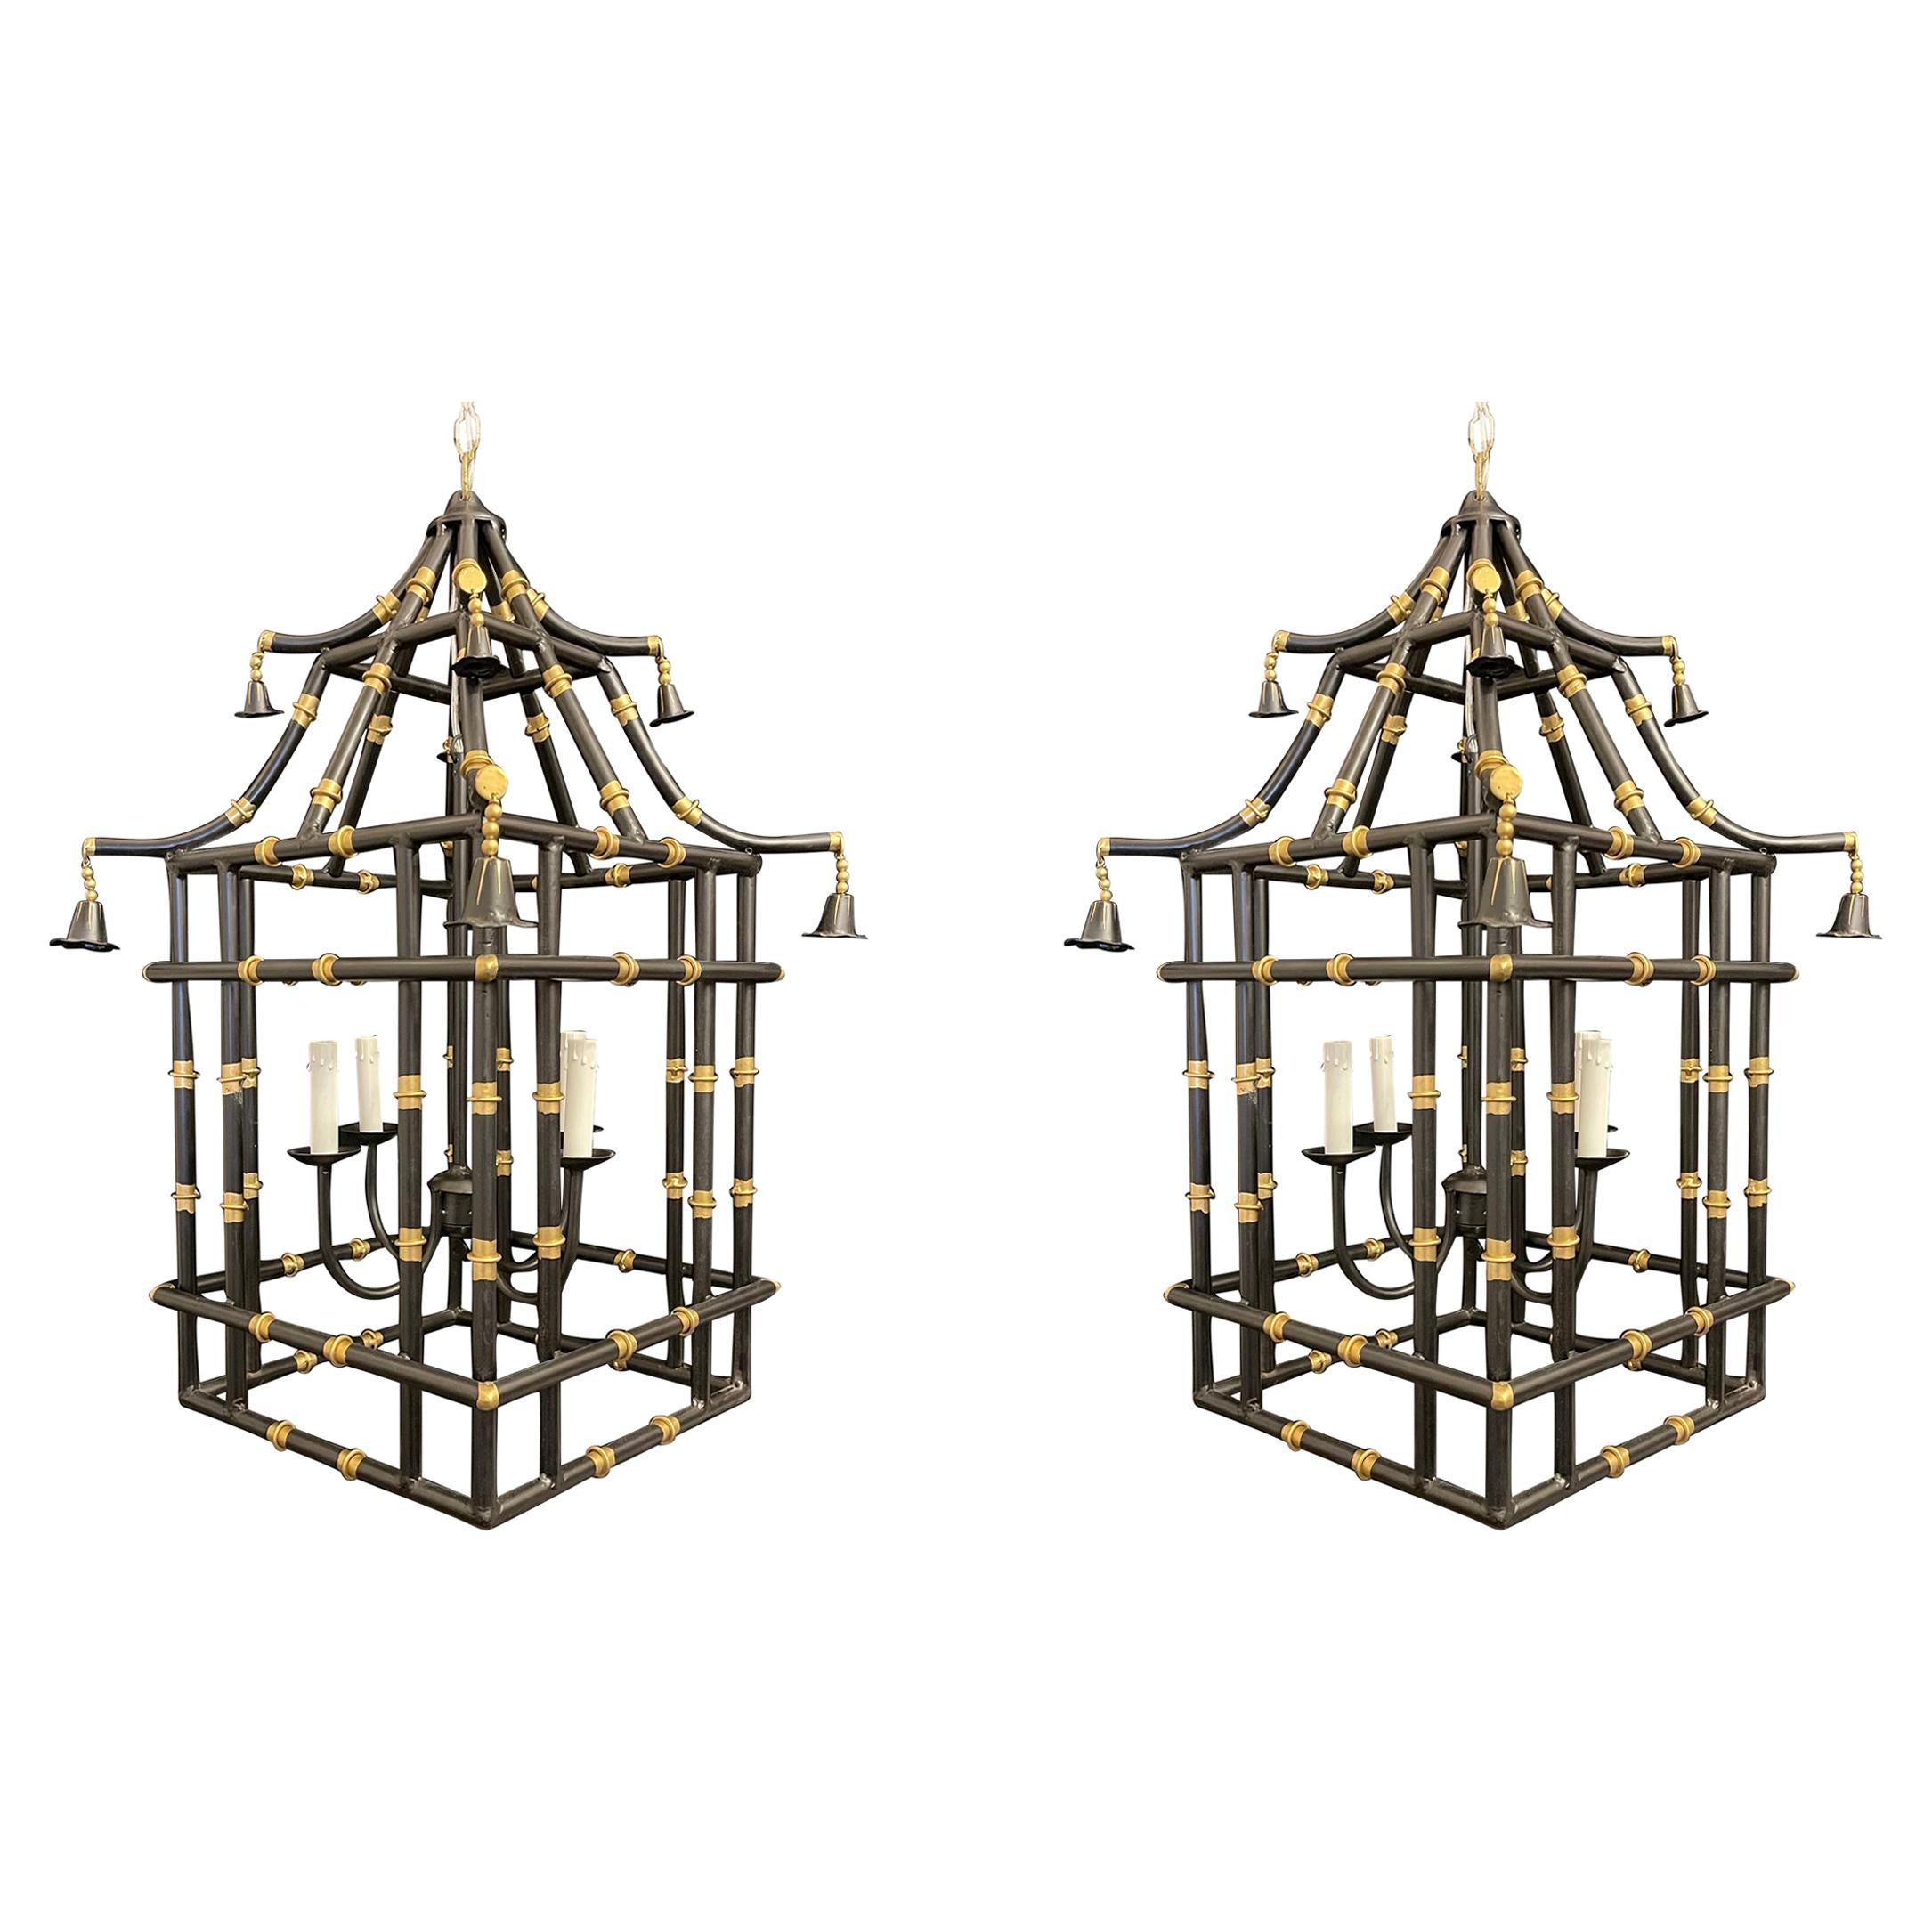 Divine Large Pair Black & Gold Gilt Pagoda Bamboo Chinoiserie Lanterns Fixtures